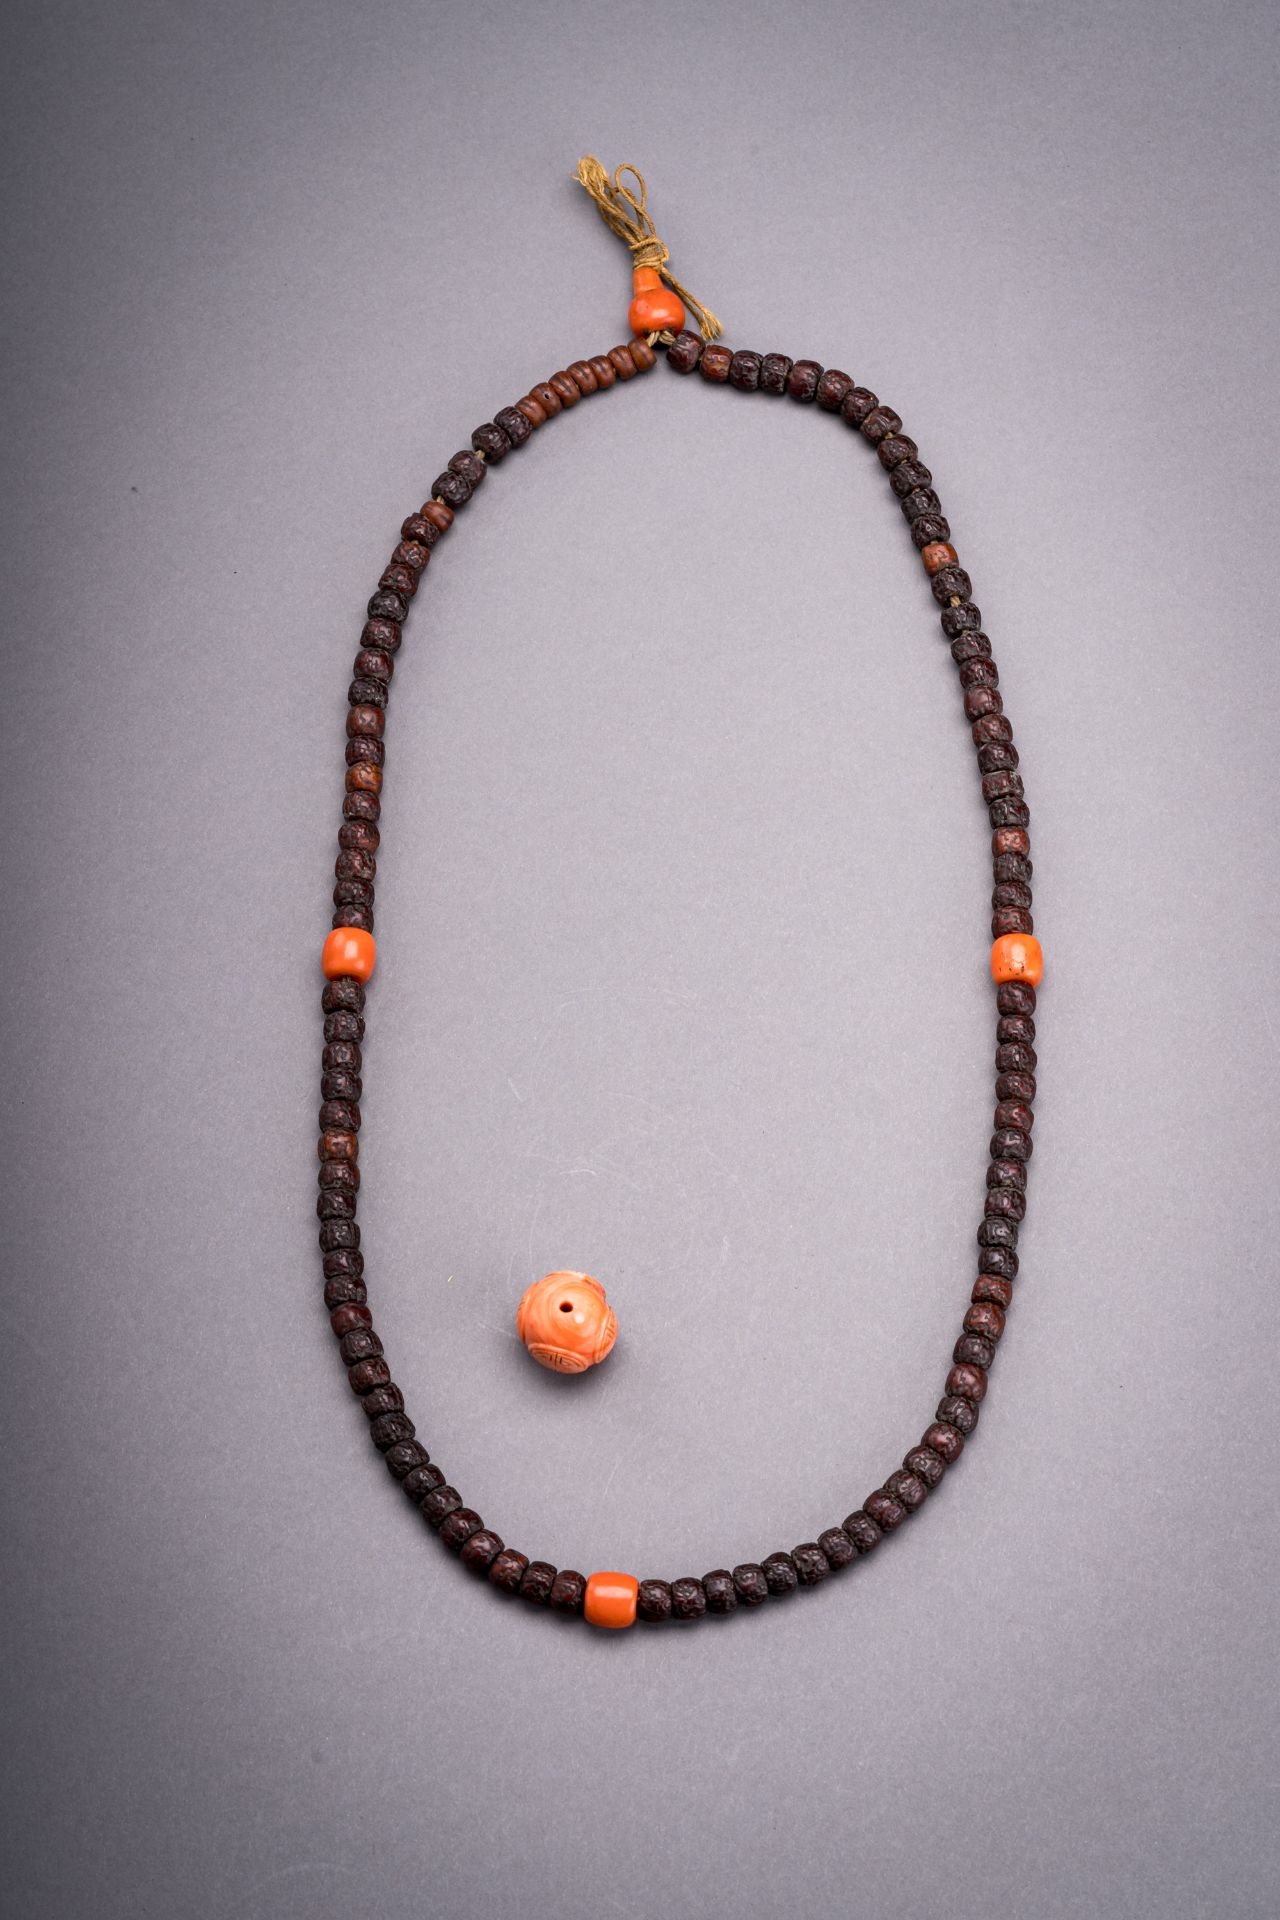 A LOT WITH A 108-BEAD MALA AND A CORAL BEAD - Image 5 of 5